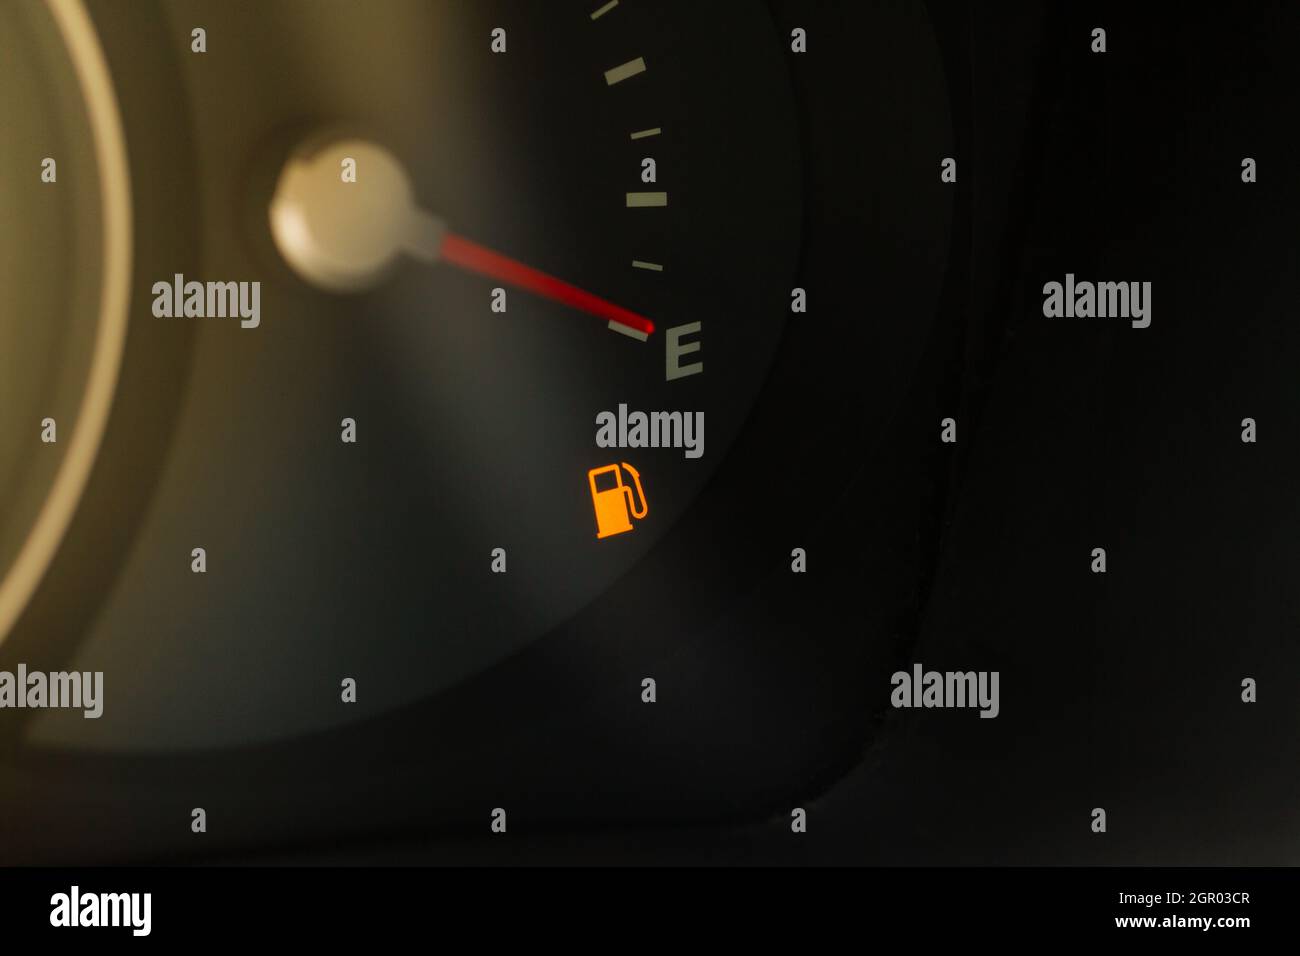 Analog fuel gauge showing warnin light about empty tank. Close up view of low fuel tank warning. Stock Photo